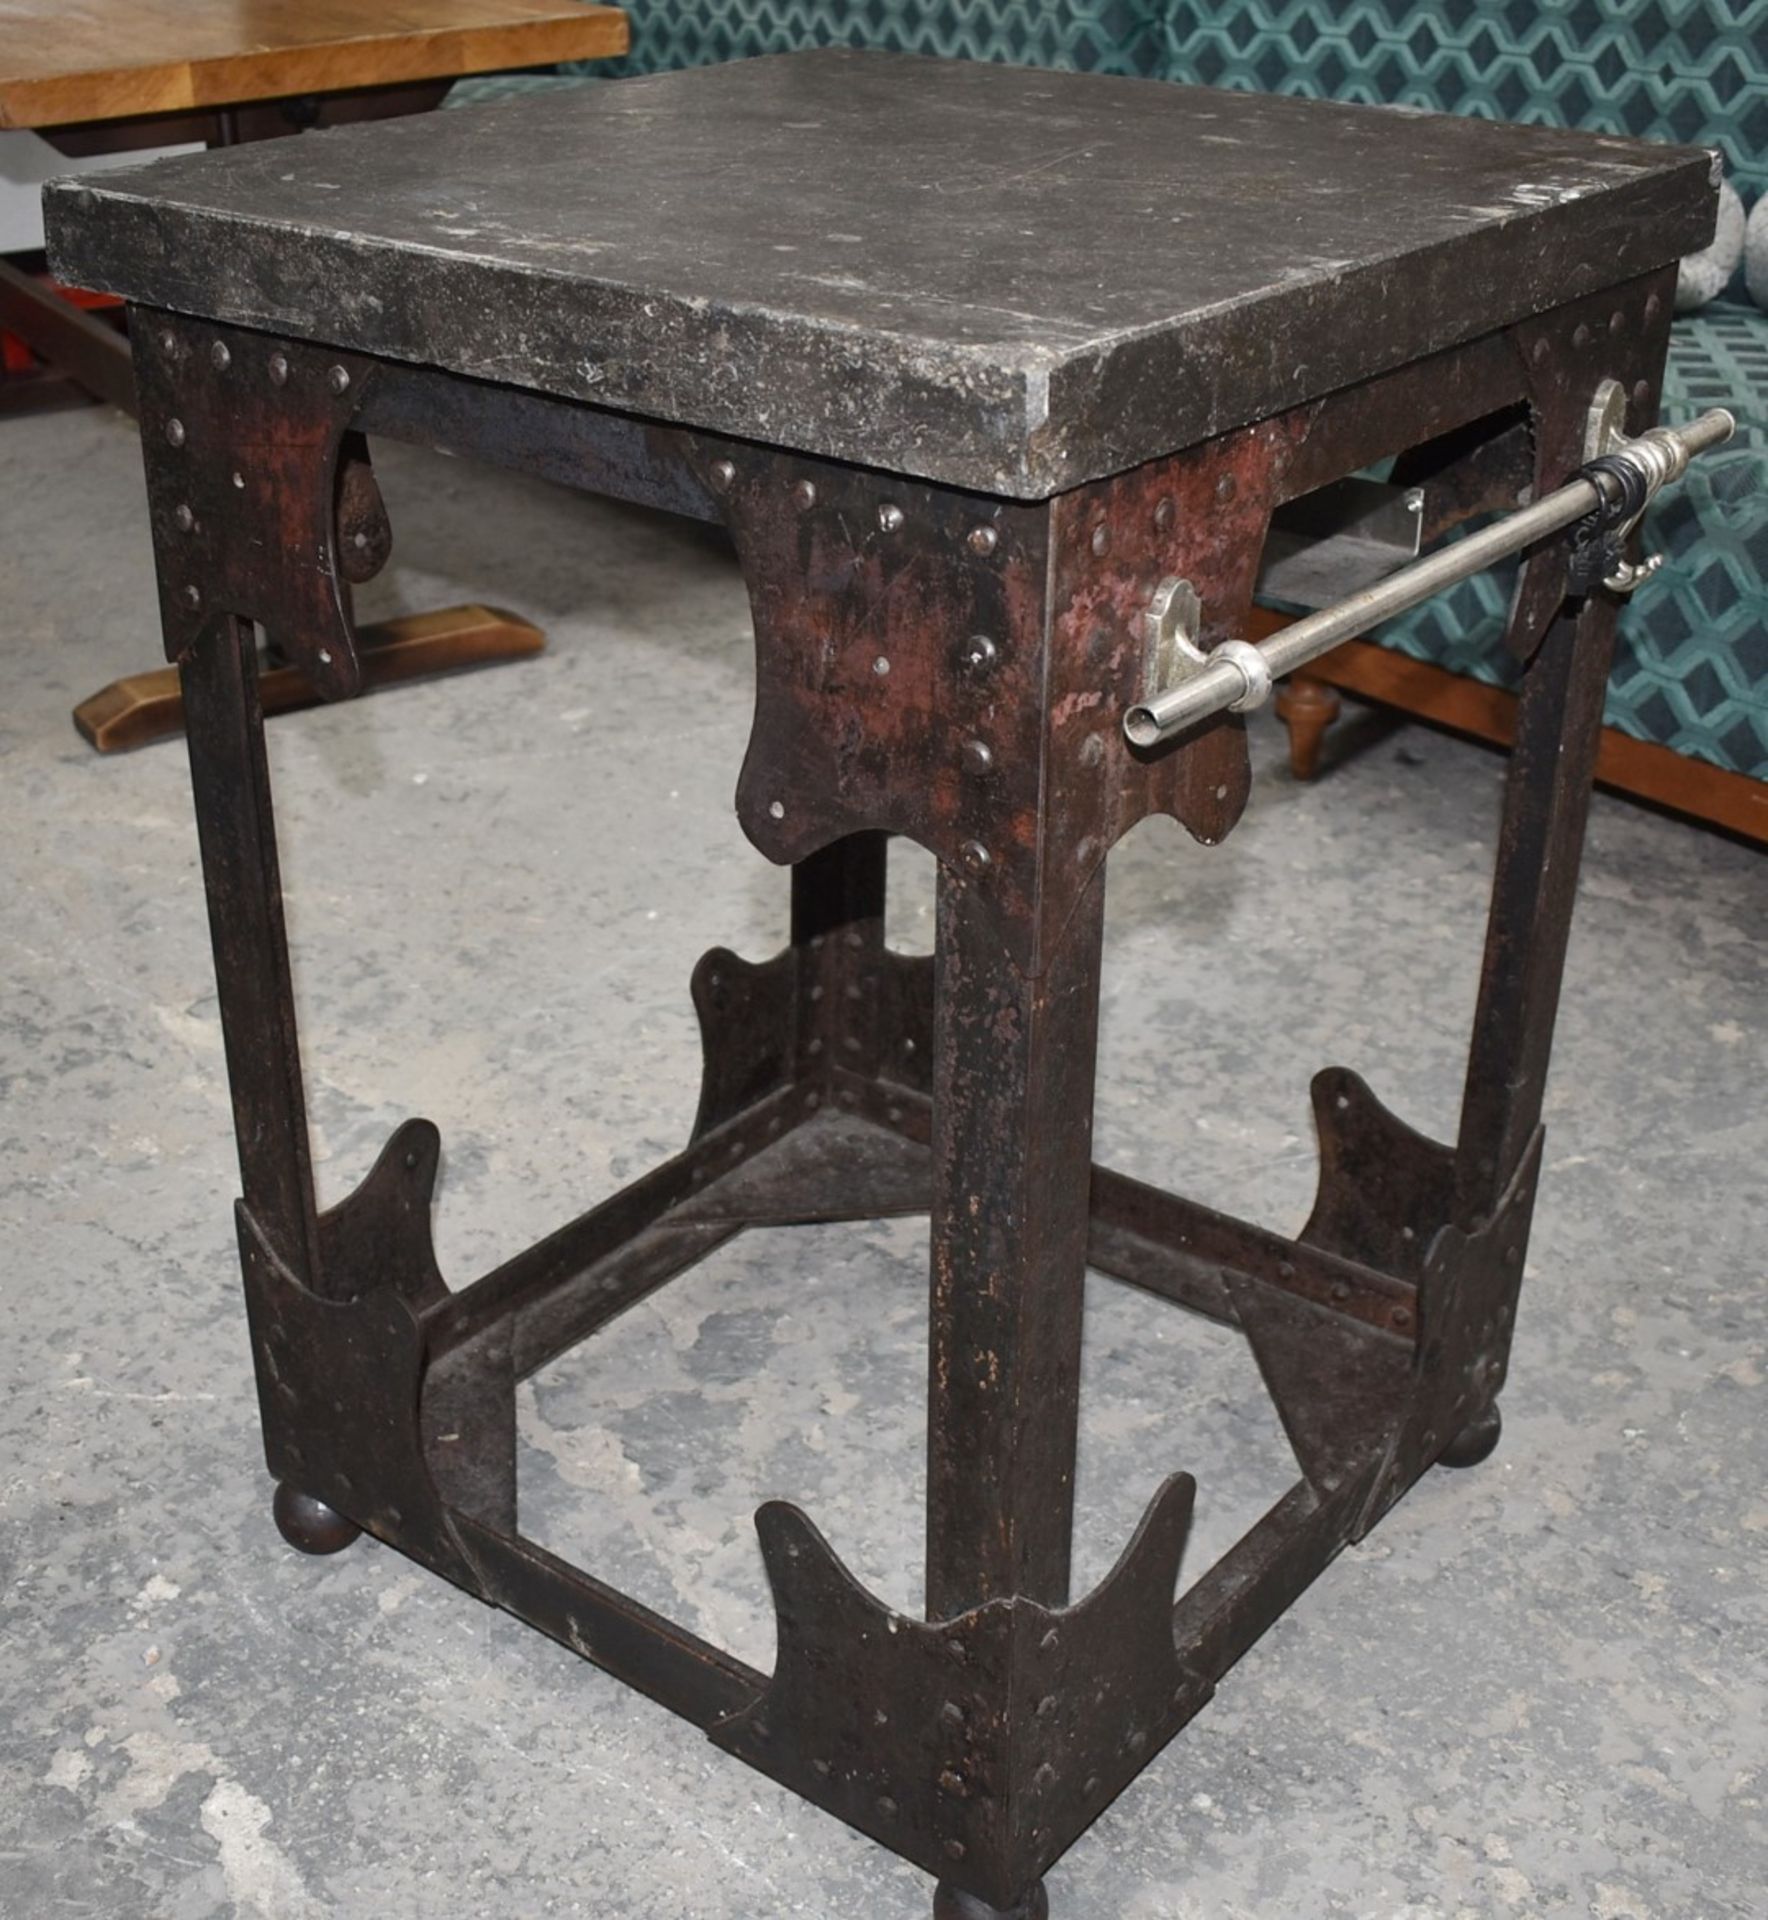 1 x Vintage Butchers Block With Riveted Steel Base, Utensil Hanging Rail and Heavy Stone Block Top - Image 10 of 11